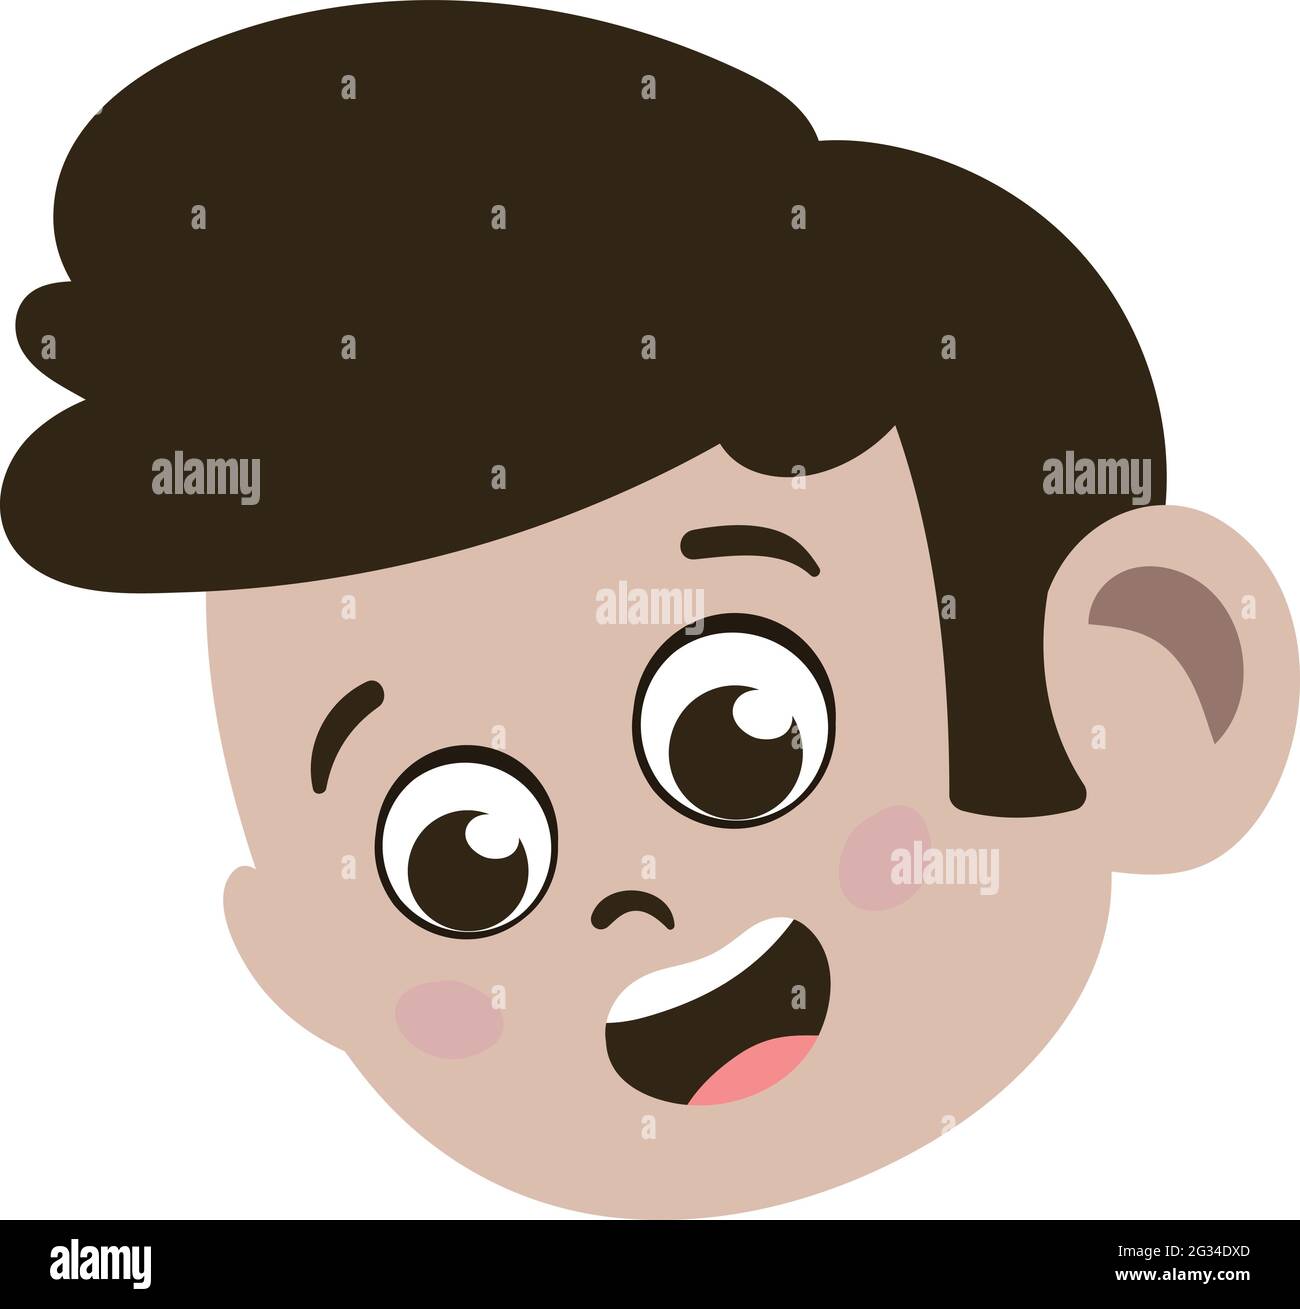 Cute kid Face. Cute and Adorable Caucasian Kid with Brunette hair. Cute Face with Innocent Expressions looking Happy. Smiling Face. Happy Face. Stock Vector